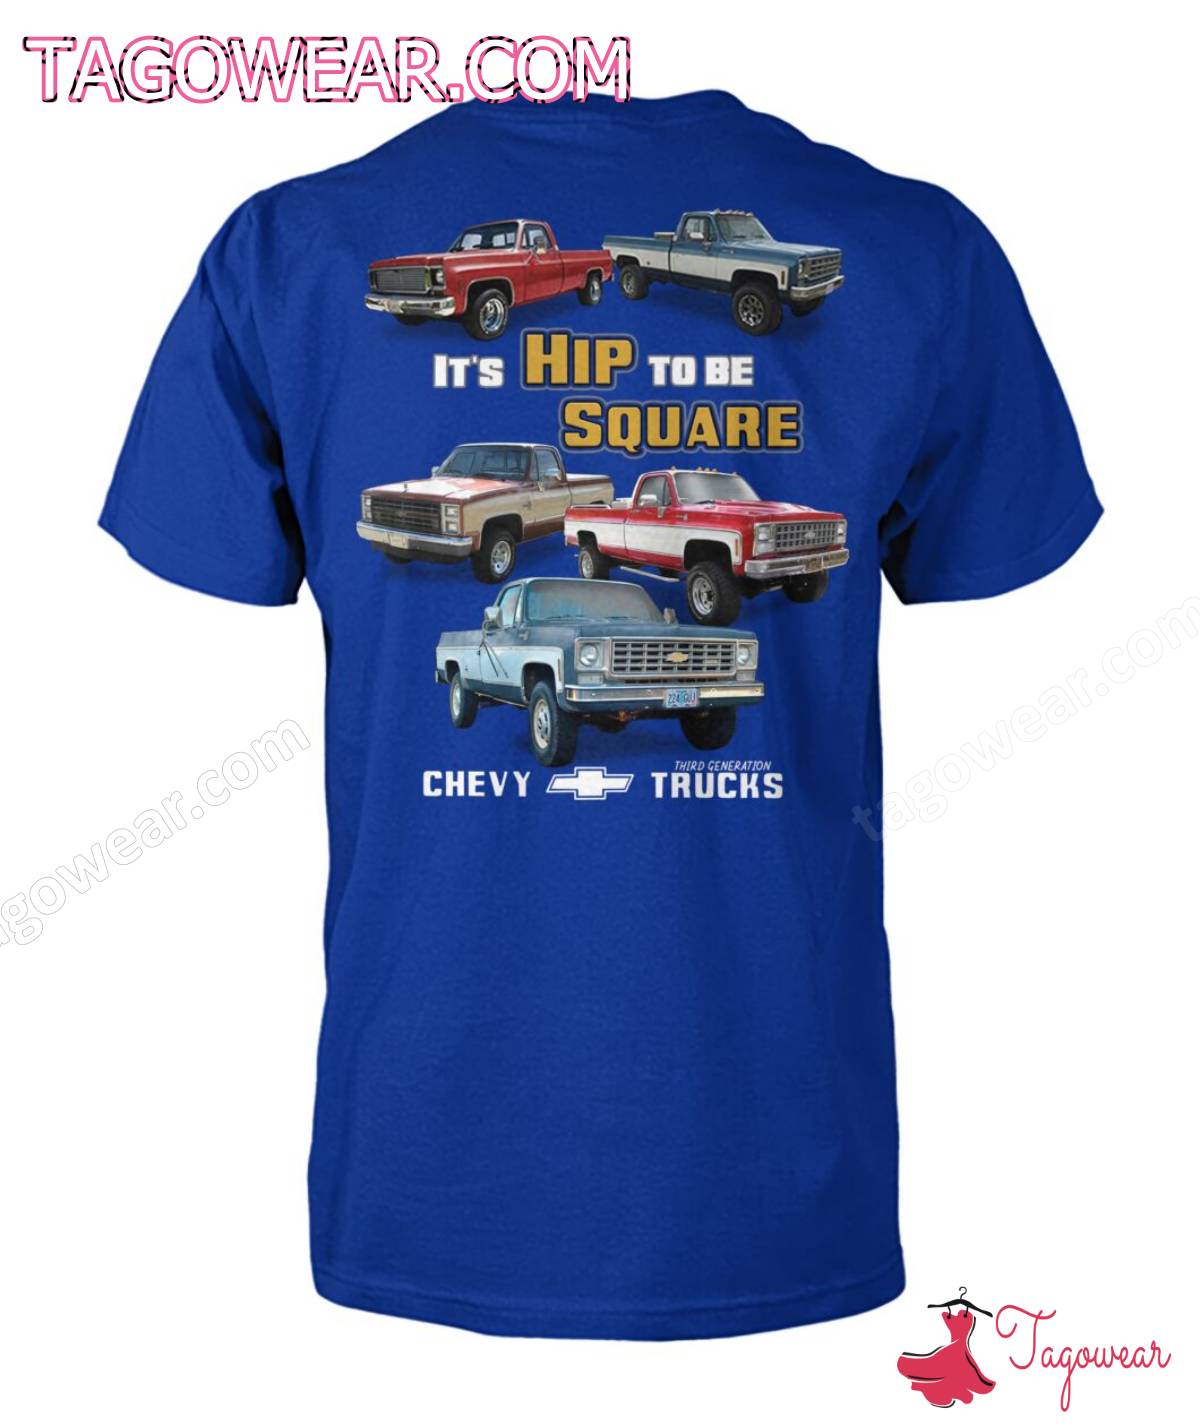 It's Hip To Be Square Chevy Third Generation Trucks Shirt